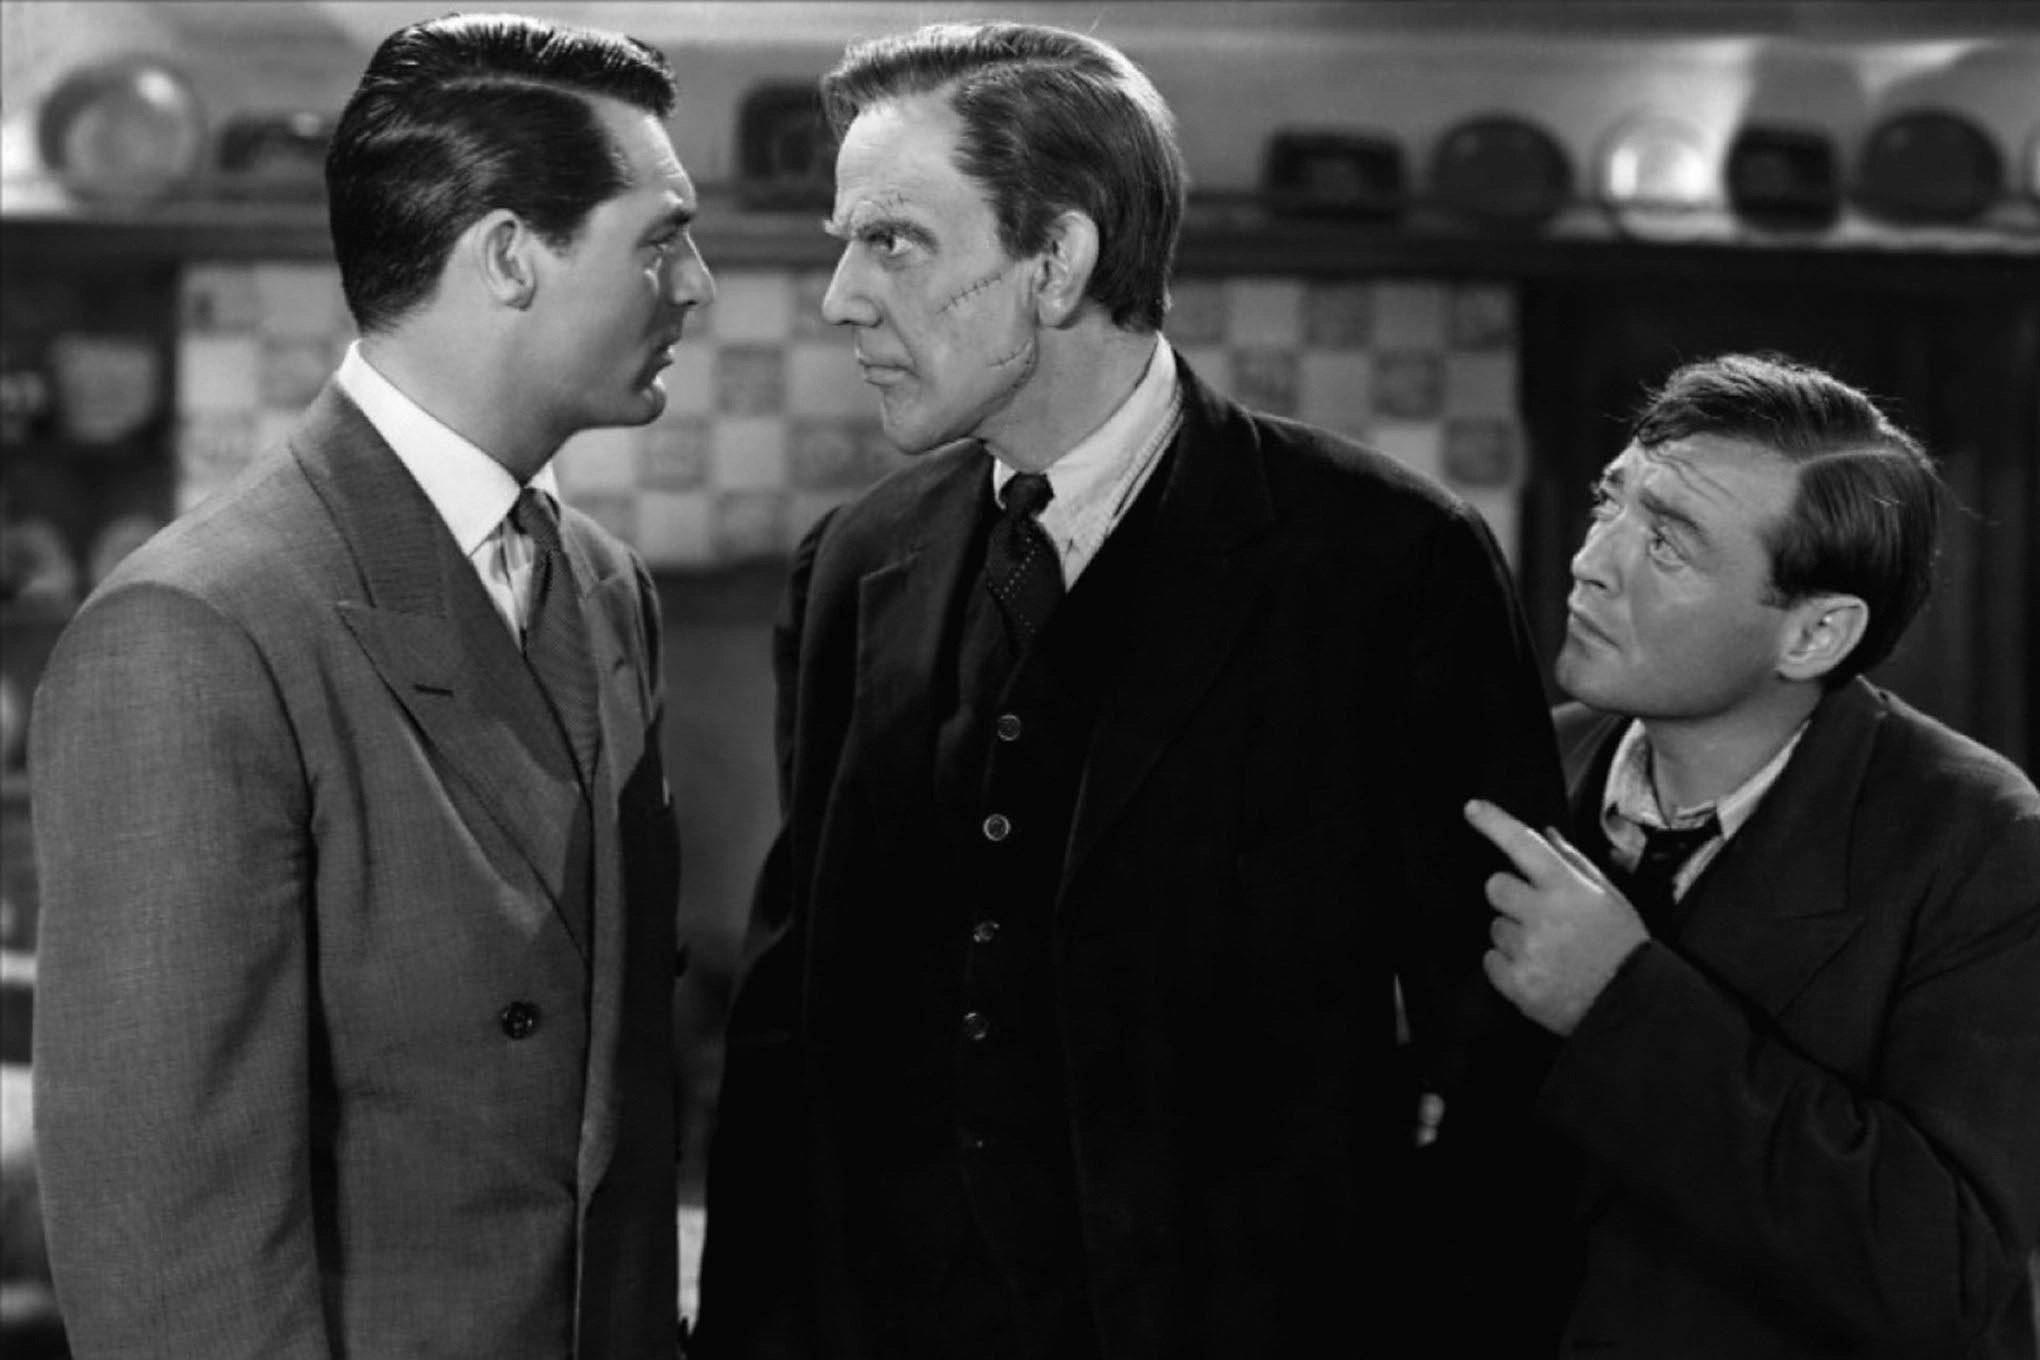 Cary Grant as Mortimer Brewster (left), Raymond Massey as Jonathan Brewster (center), and Peter Lorre as Dr. Einstein in <i>Arsenic and Old Lace</i> (1944)